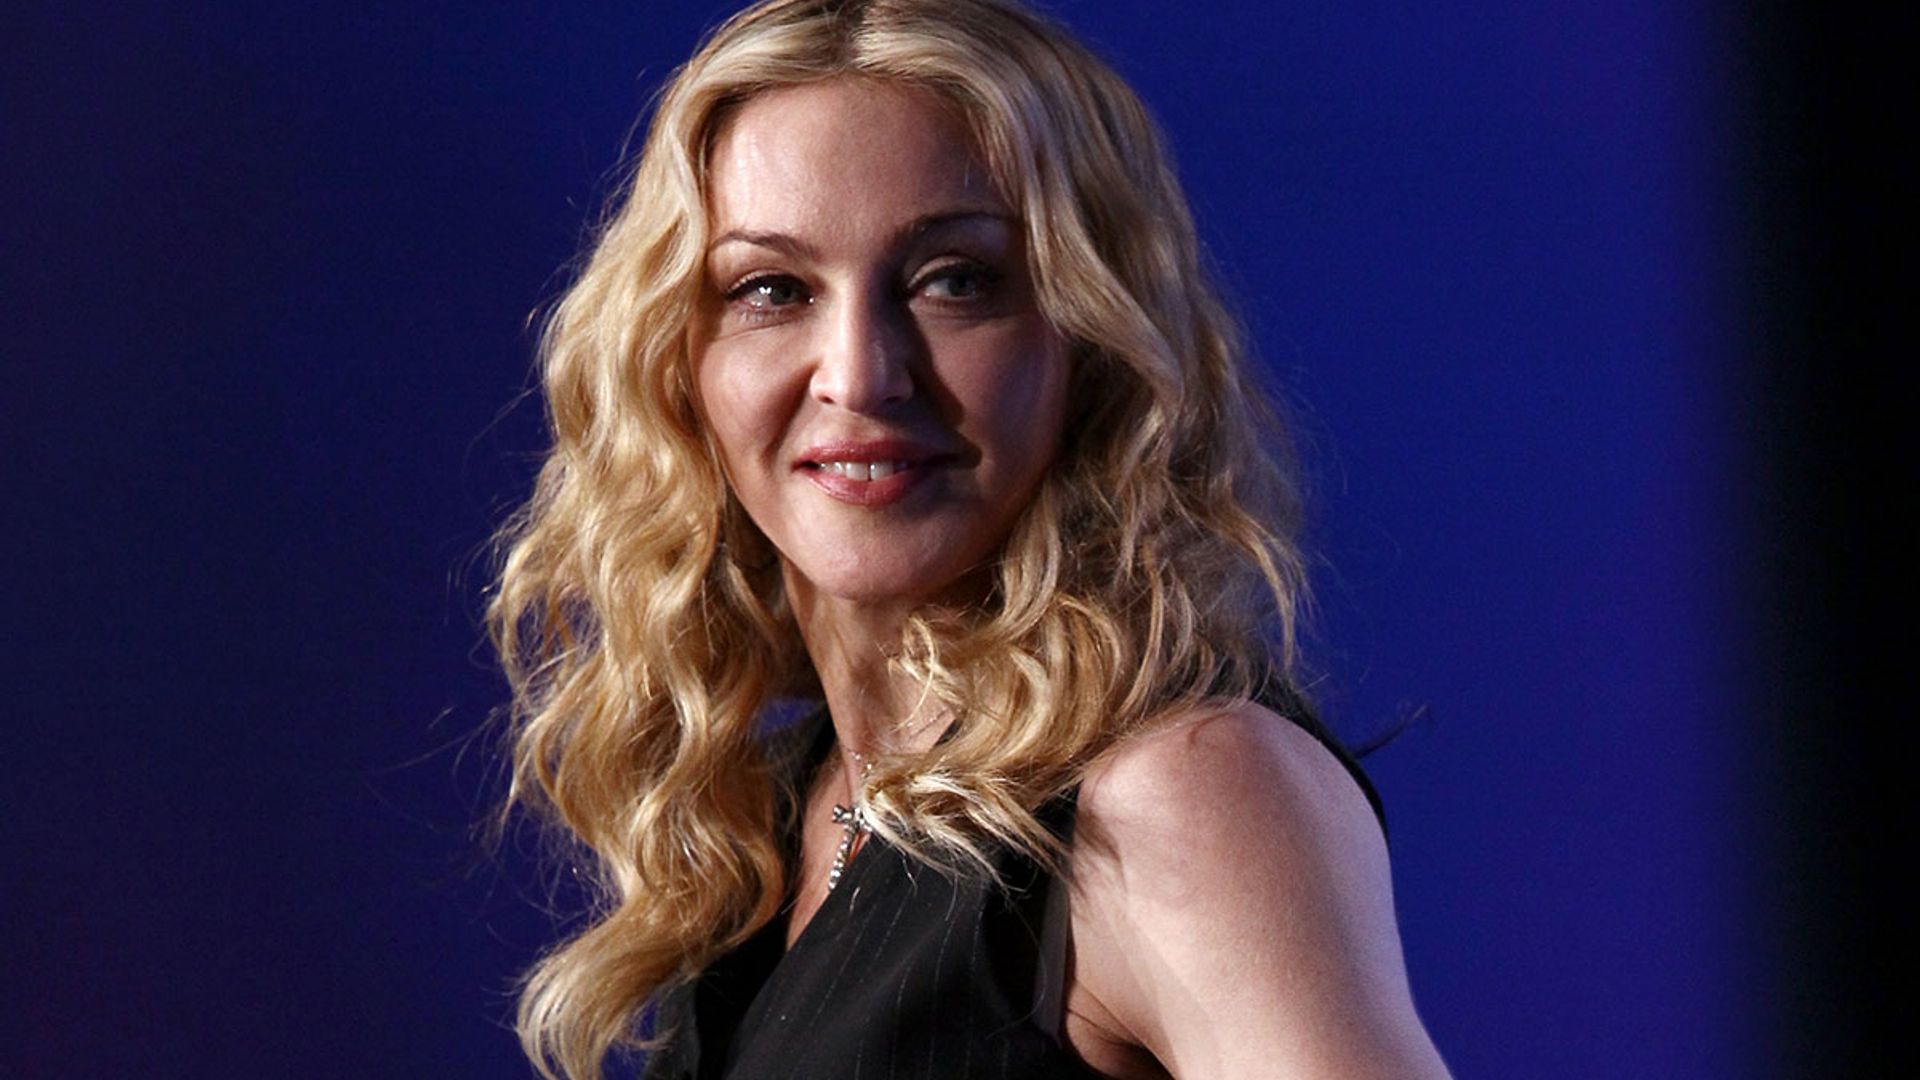 Madonna shares picture of herself in bridal gown and fans go wild